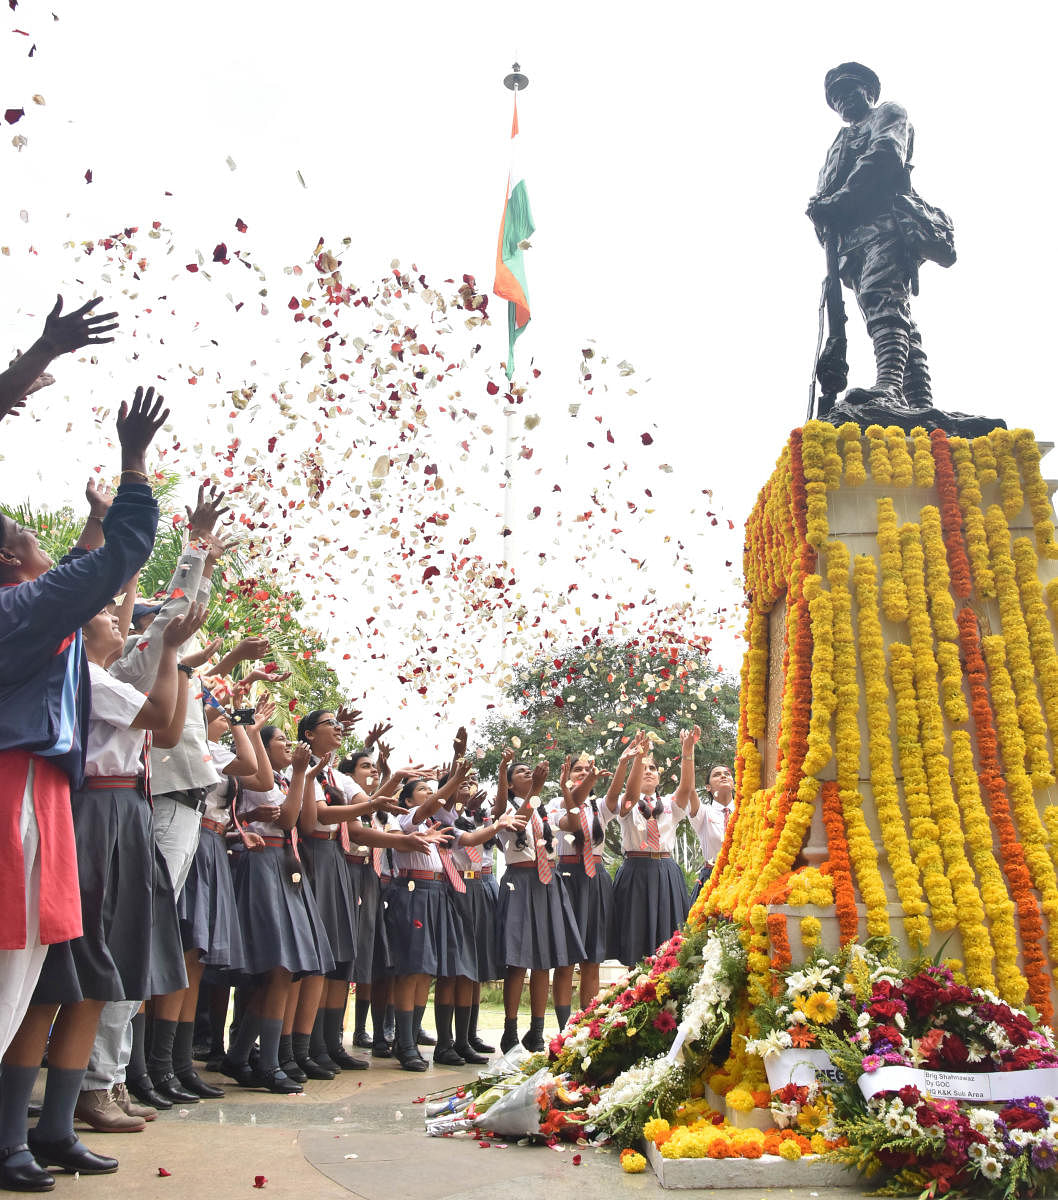 Schoolgirls pay floral tributes to soldiers who fought the Indo-Pak war of 1965 at the National Military Memorial in Bengaluru on Monday. DH PHOTO/Janardhan B K